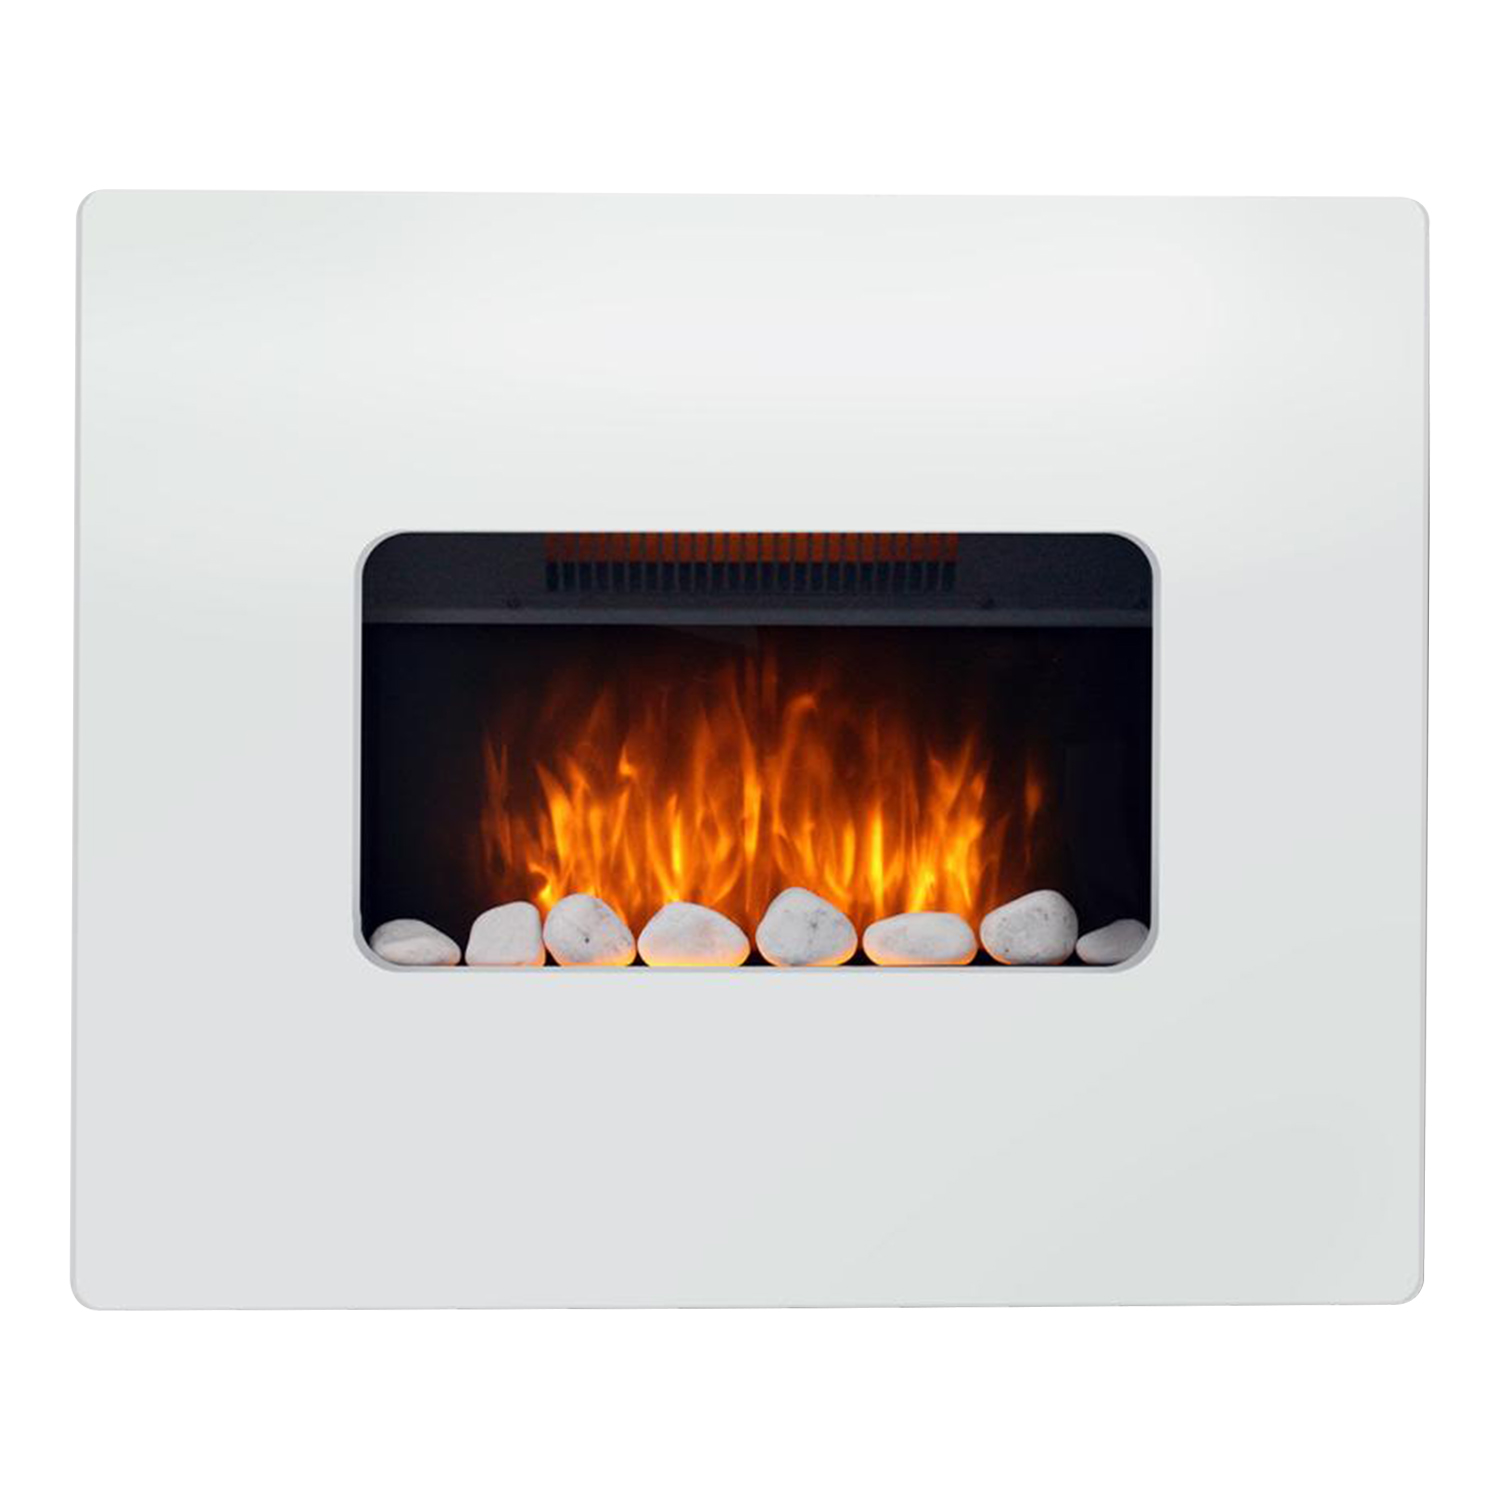 TruFlame 1.8kW Black Curved Glass Screen Wall Mounted Fireplace with Pebbles